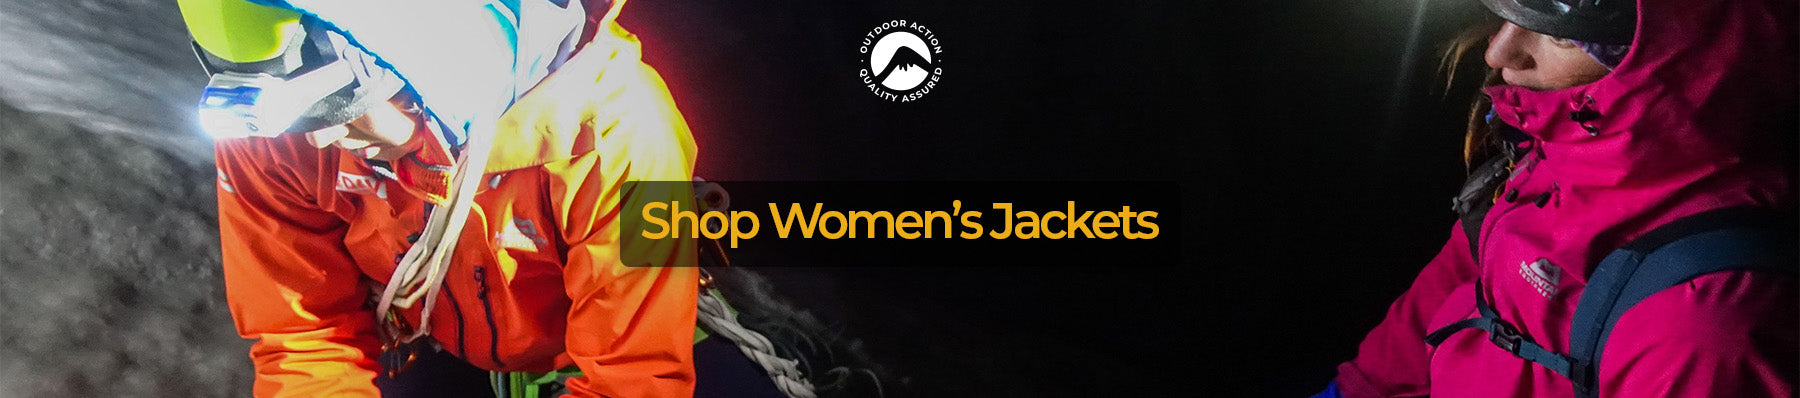 Shop Women's Jackets online at Outdoor Action